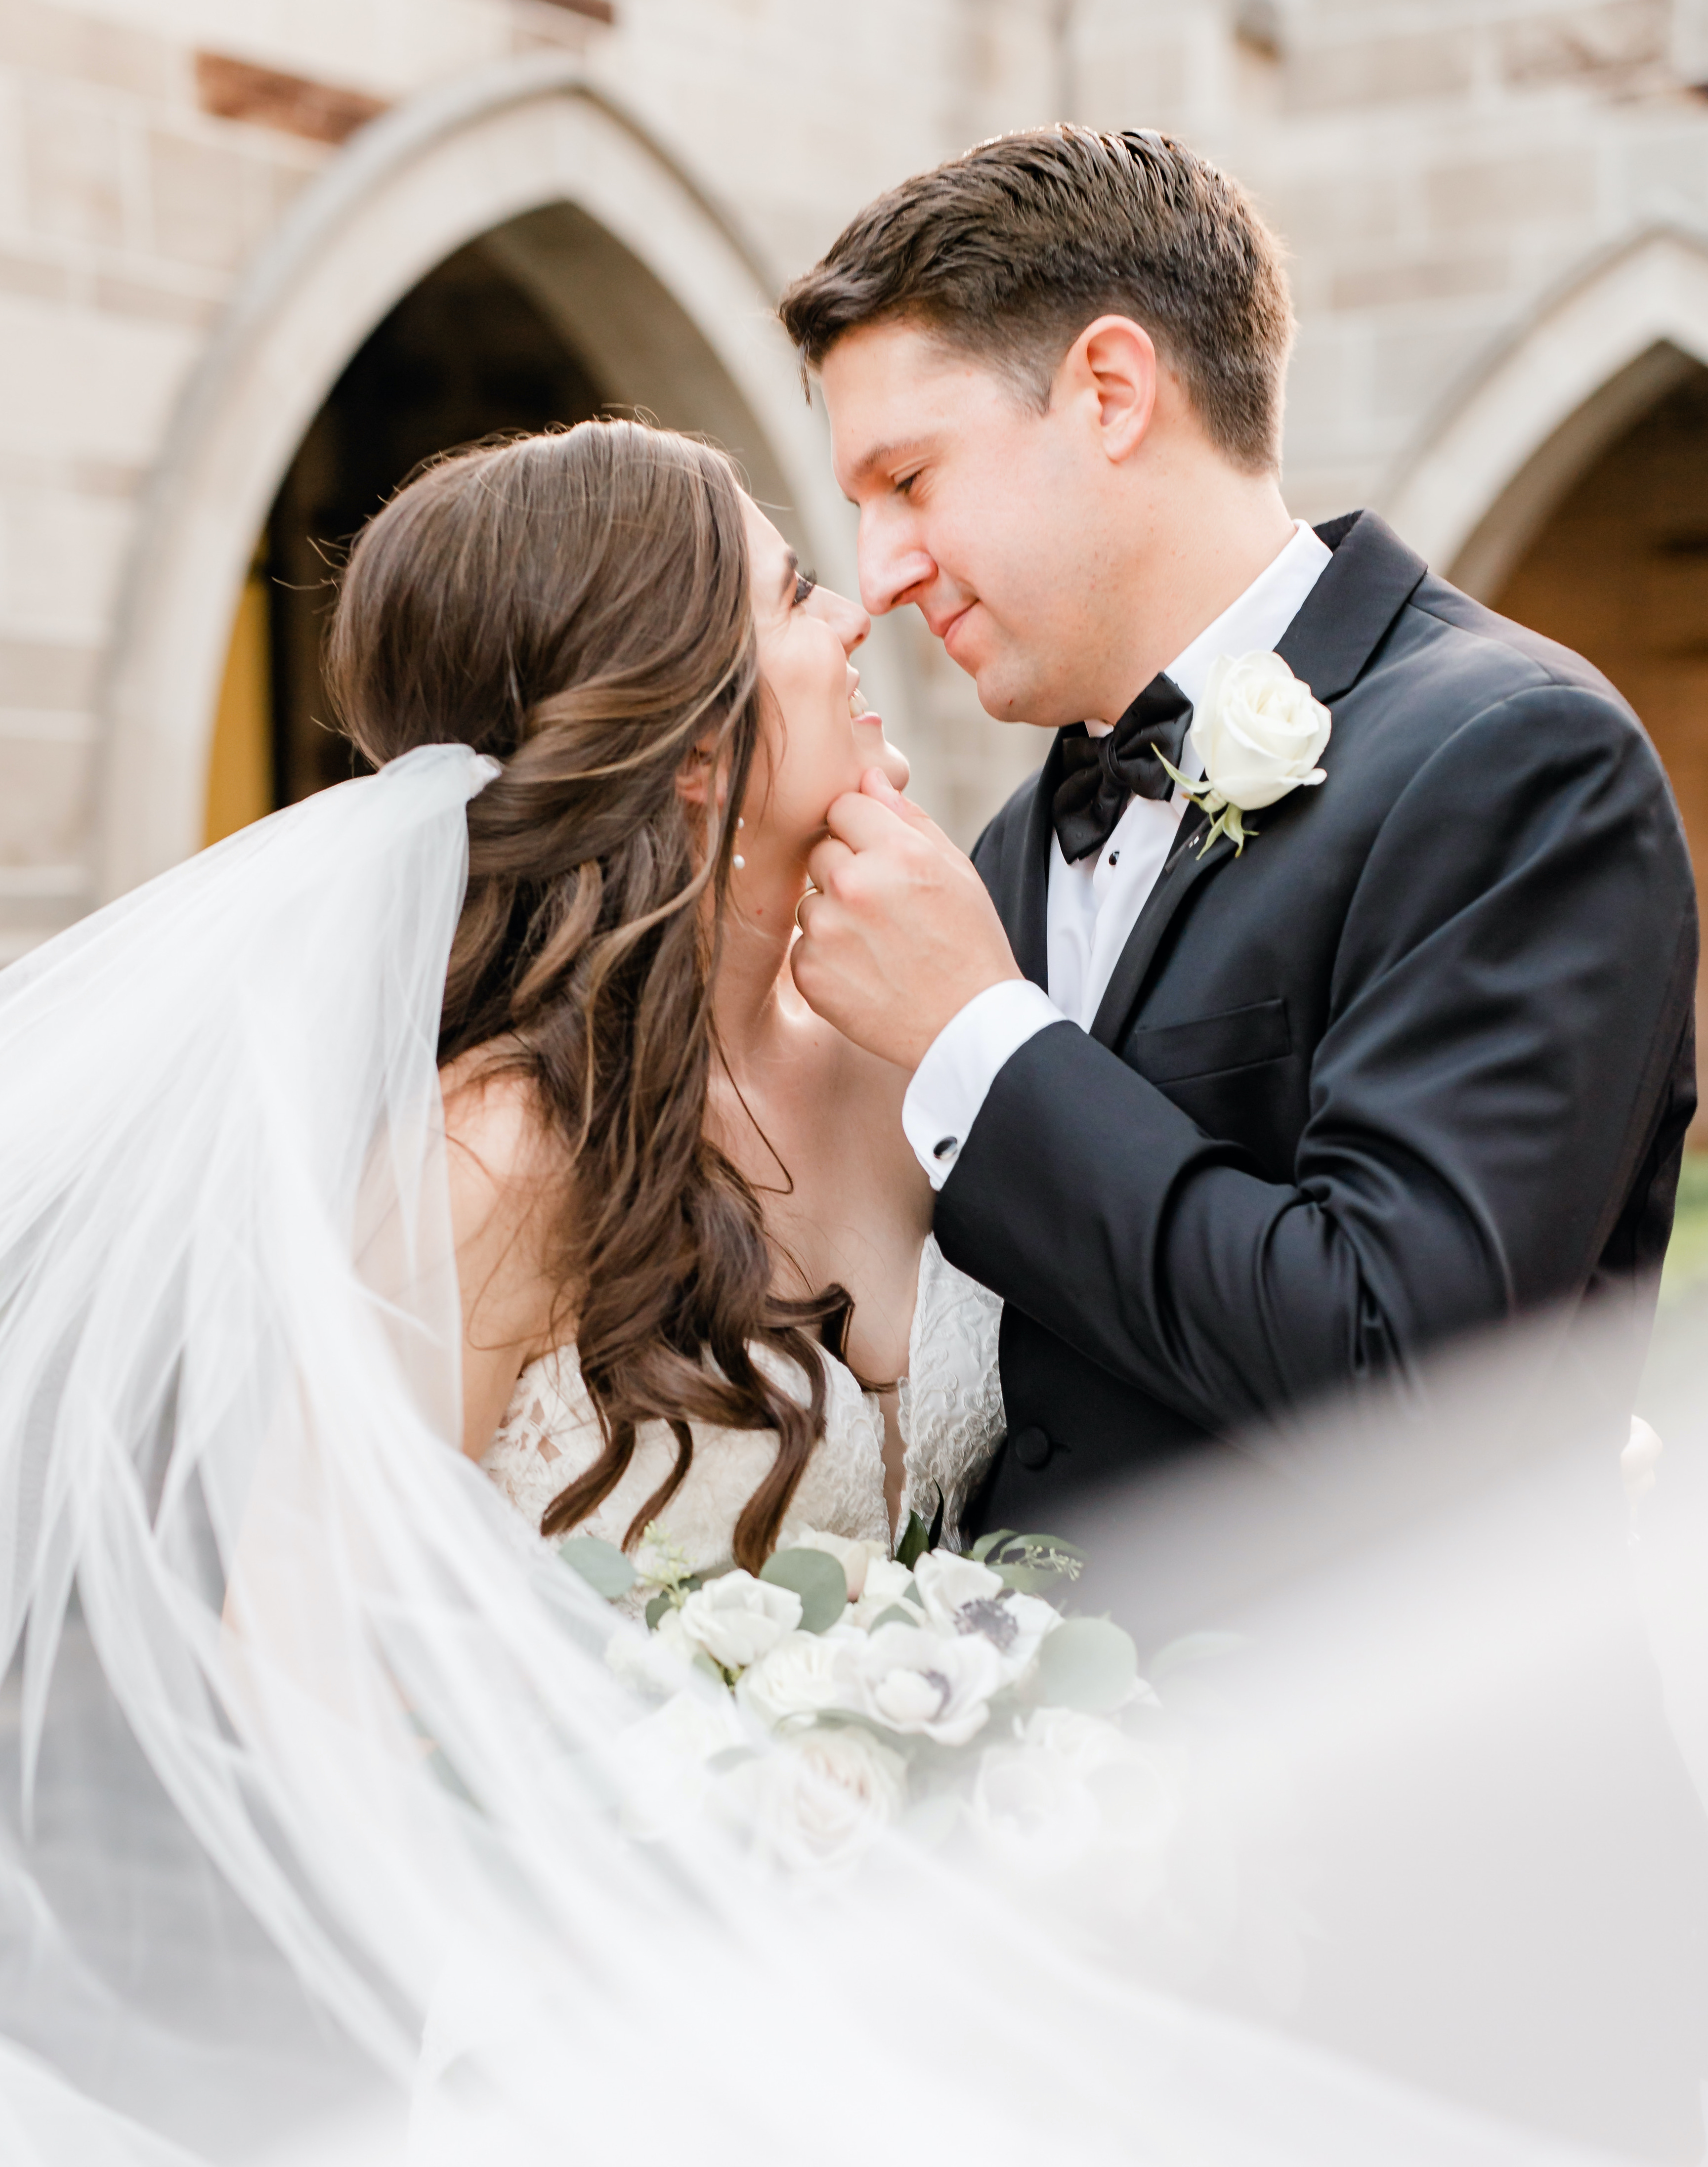 A bride and groom look at each other while outside of a church in Houston.